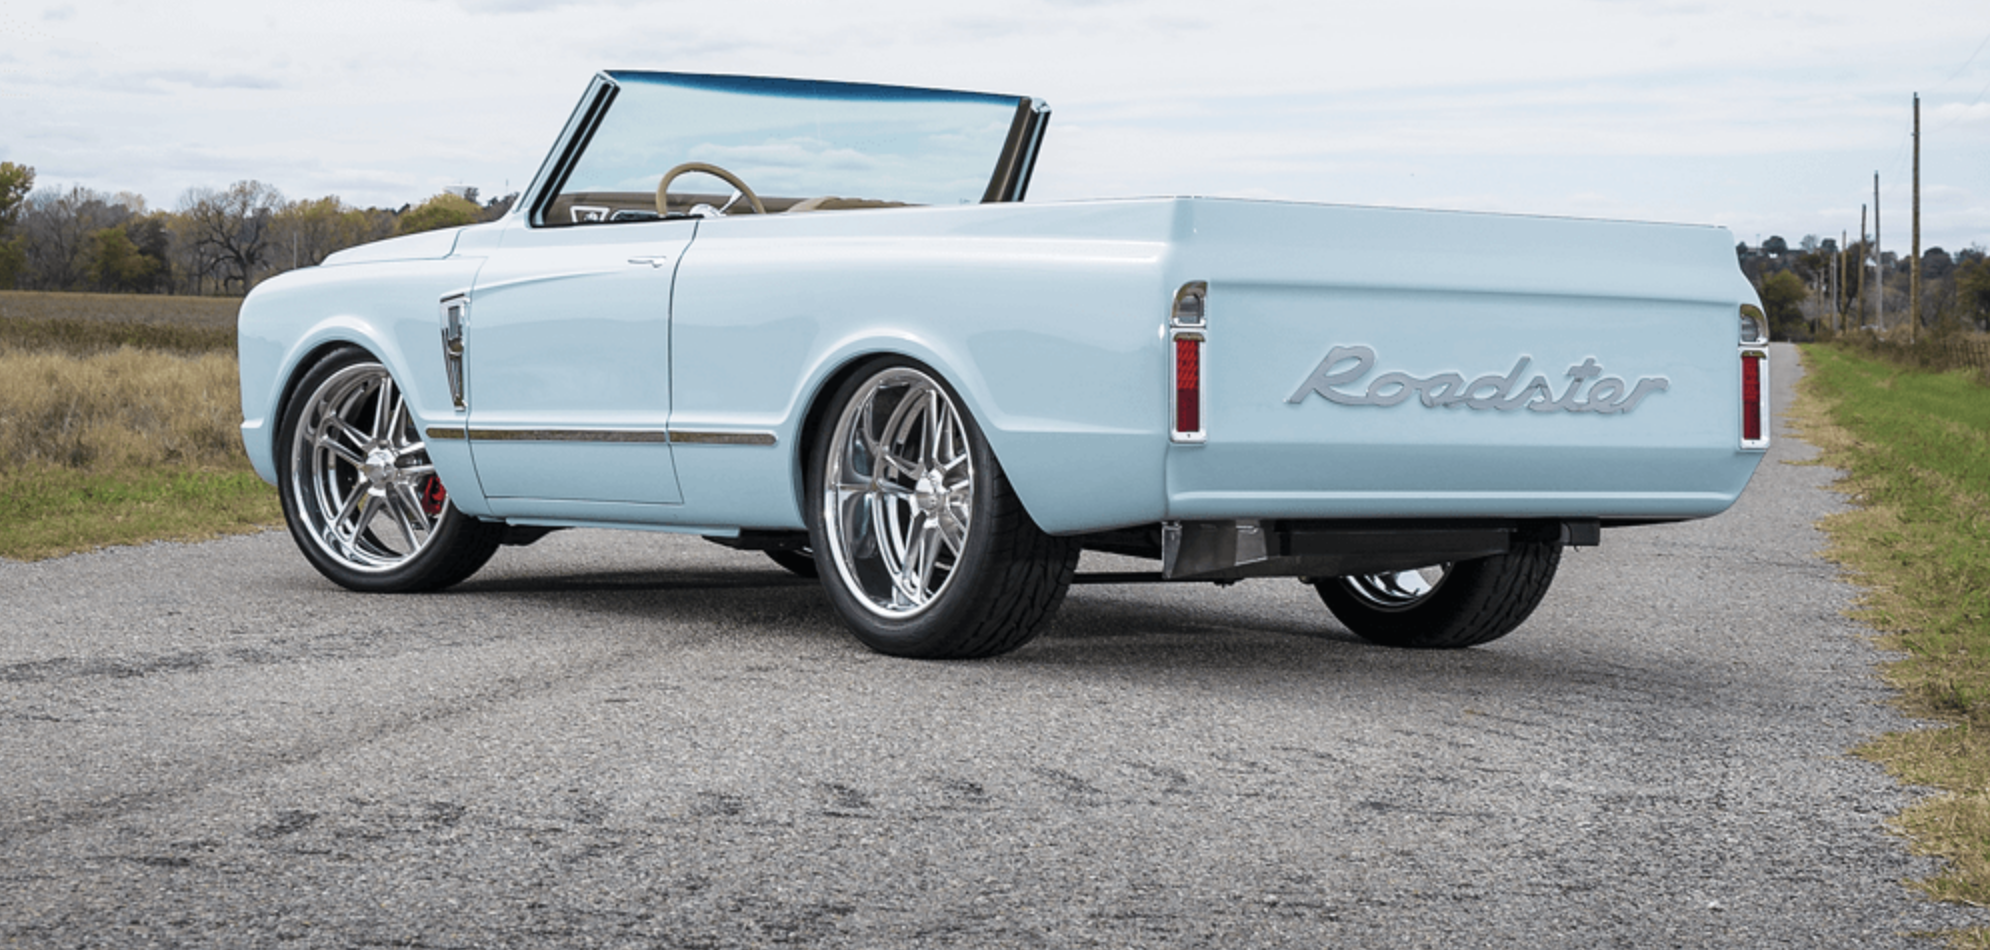 Light blue Royster c10 on the country road